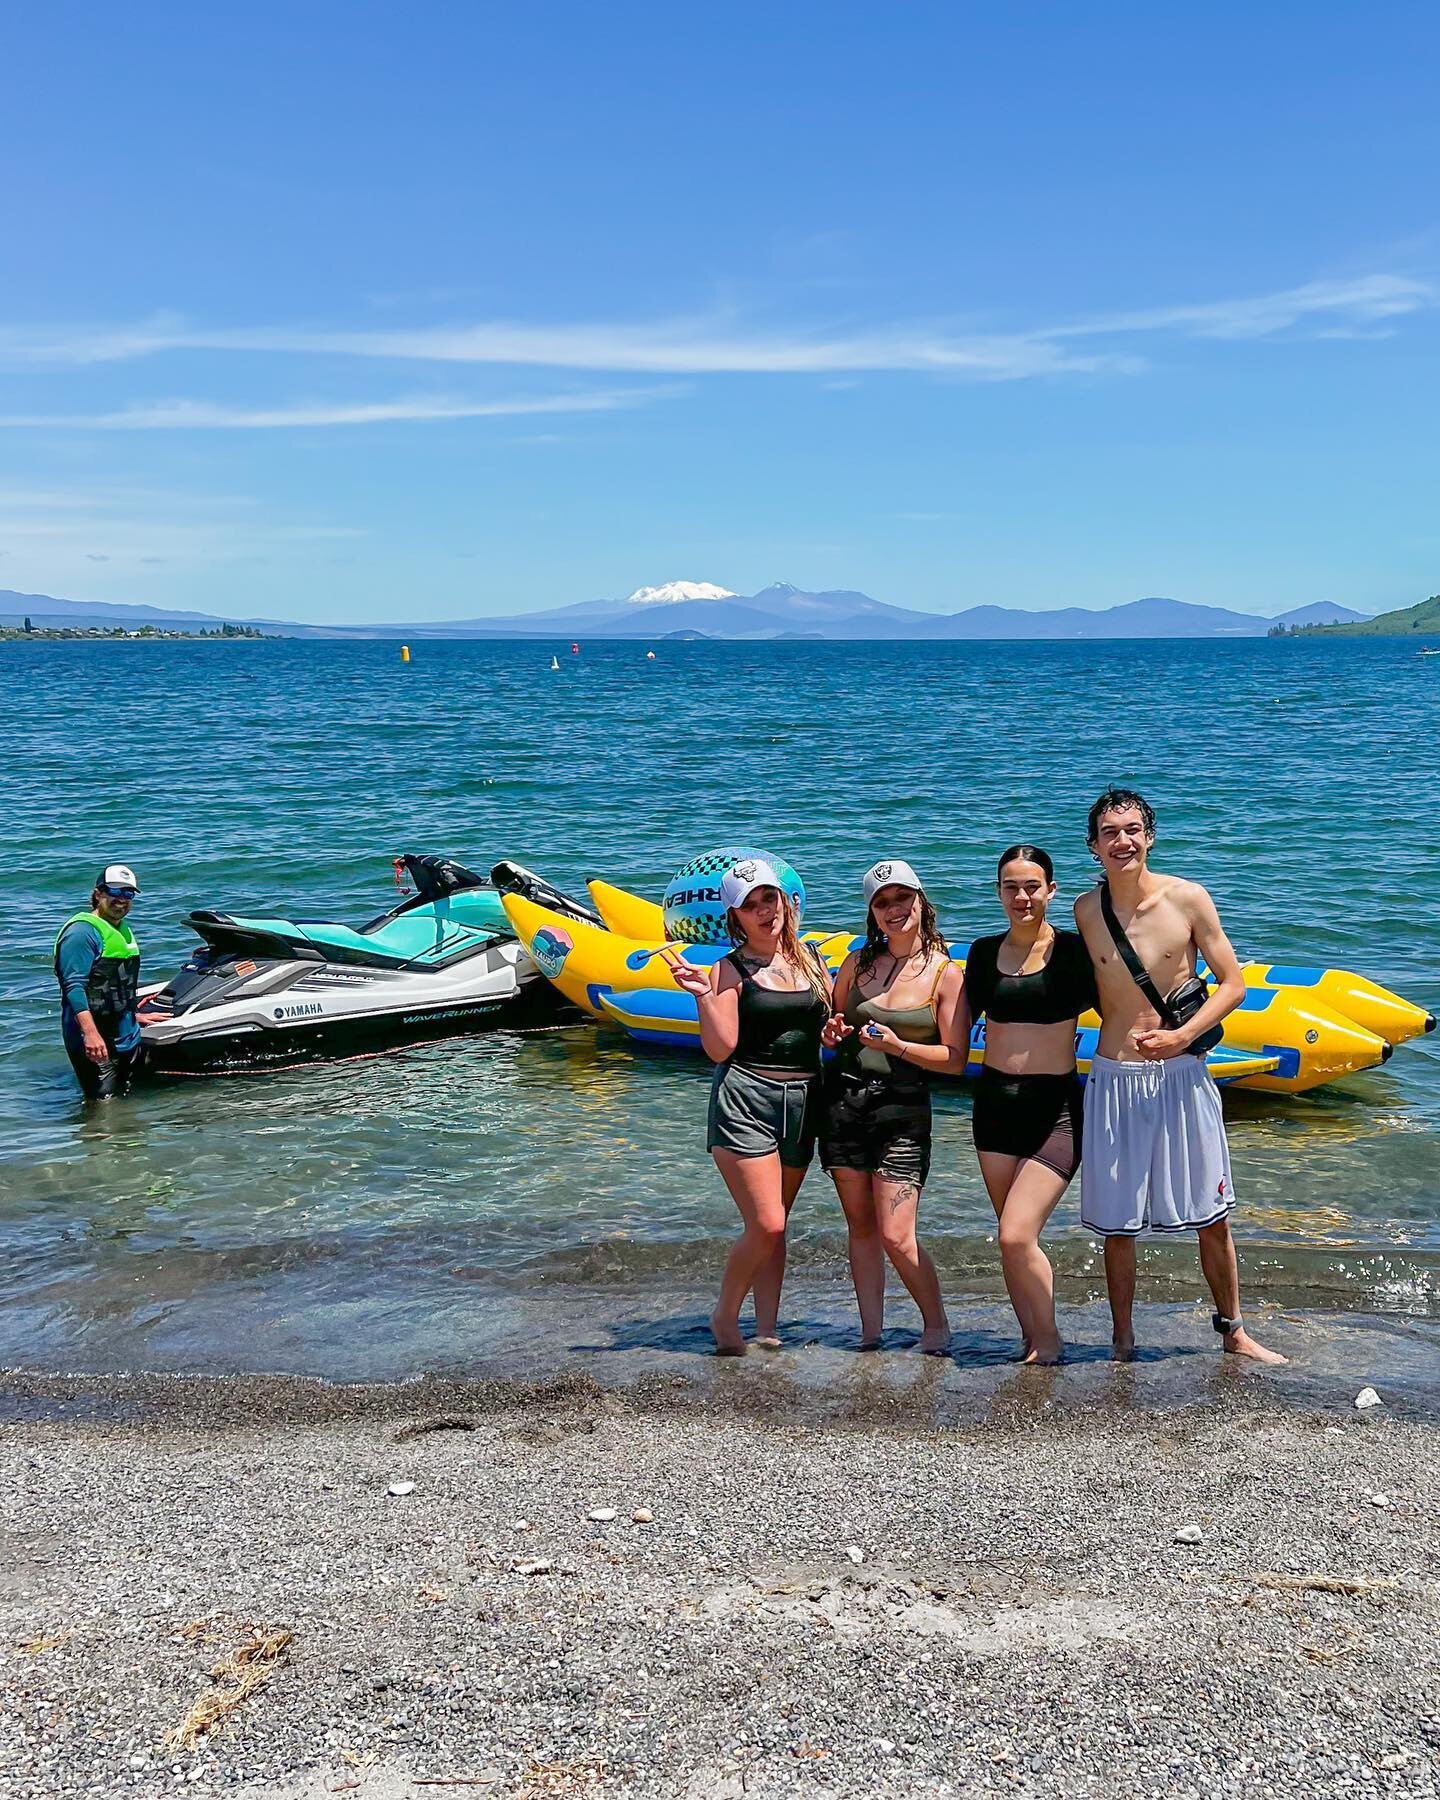 This crew saw our post at 7am this morning and drove from Rotorua to Taupō just to ride the banana boat! 🥳🥰 They said it was so much fun &amp; they&rsquo;d be back every weekend! 🙌 #lovetaupo